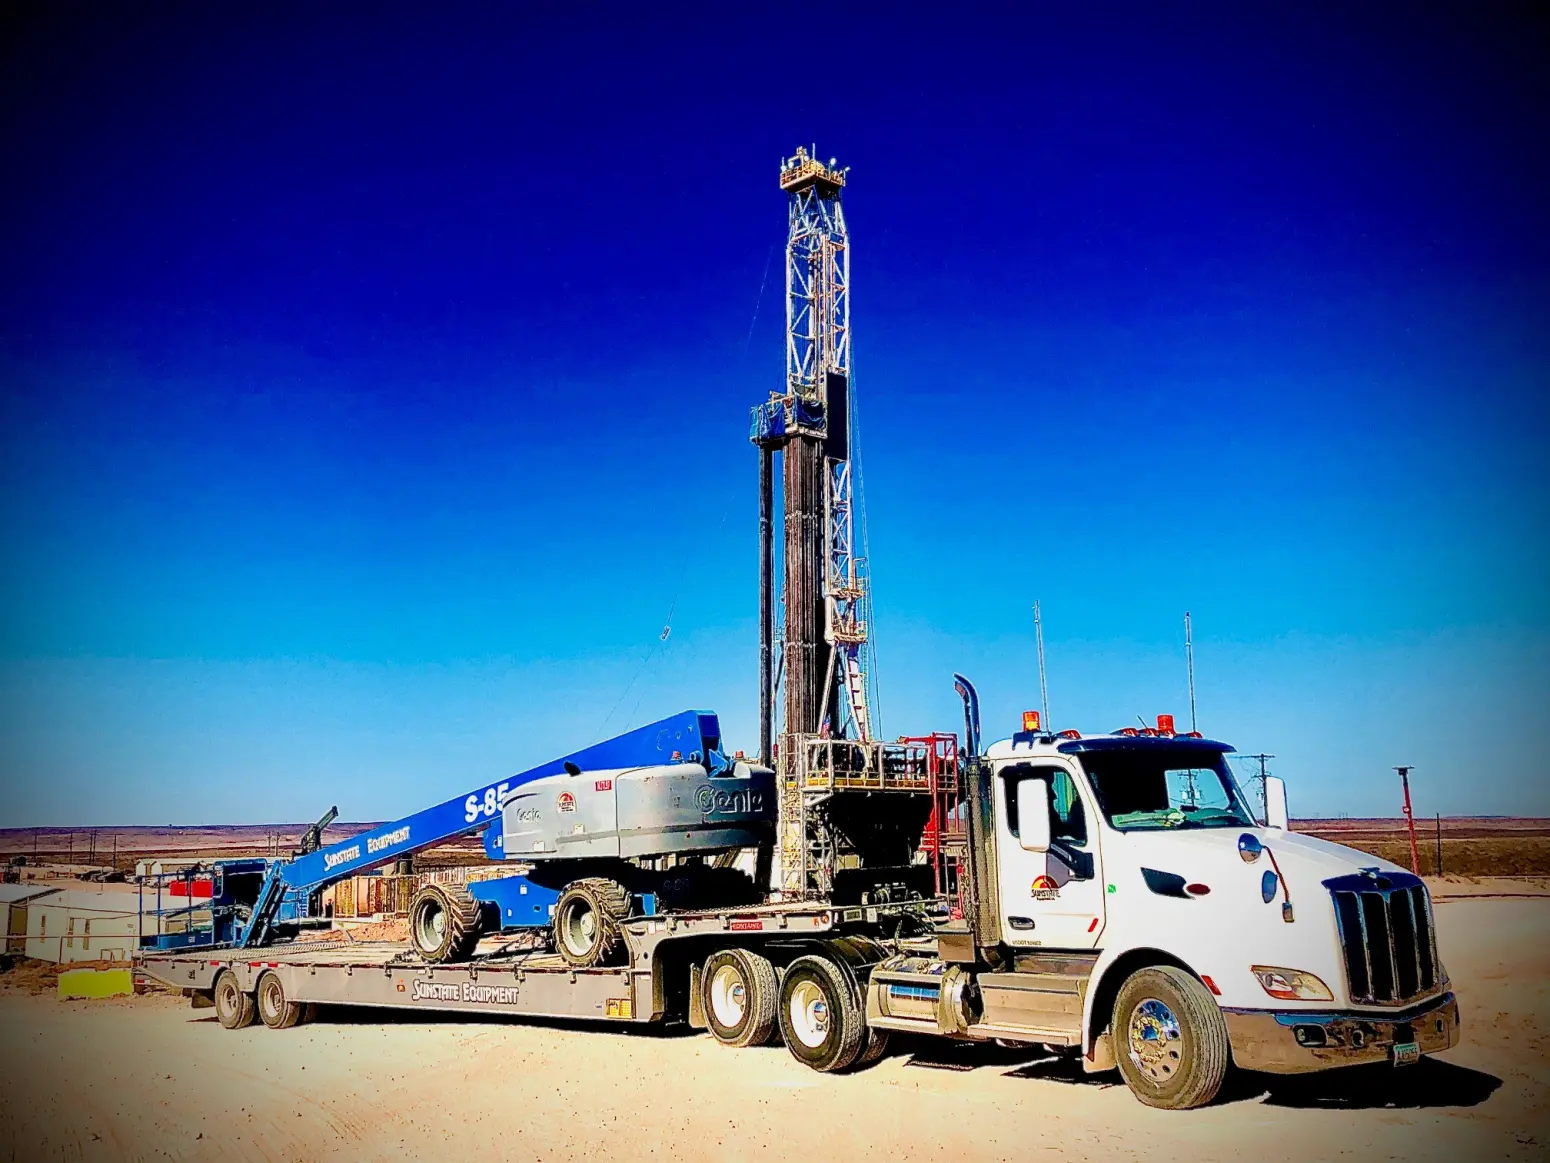 Delivery to oil rig in New Mexico